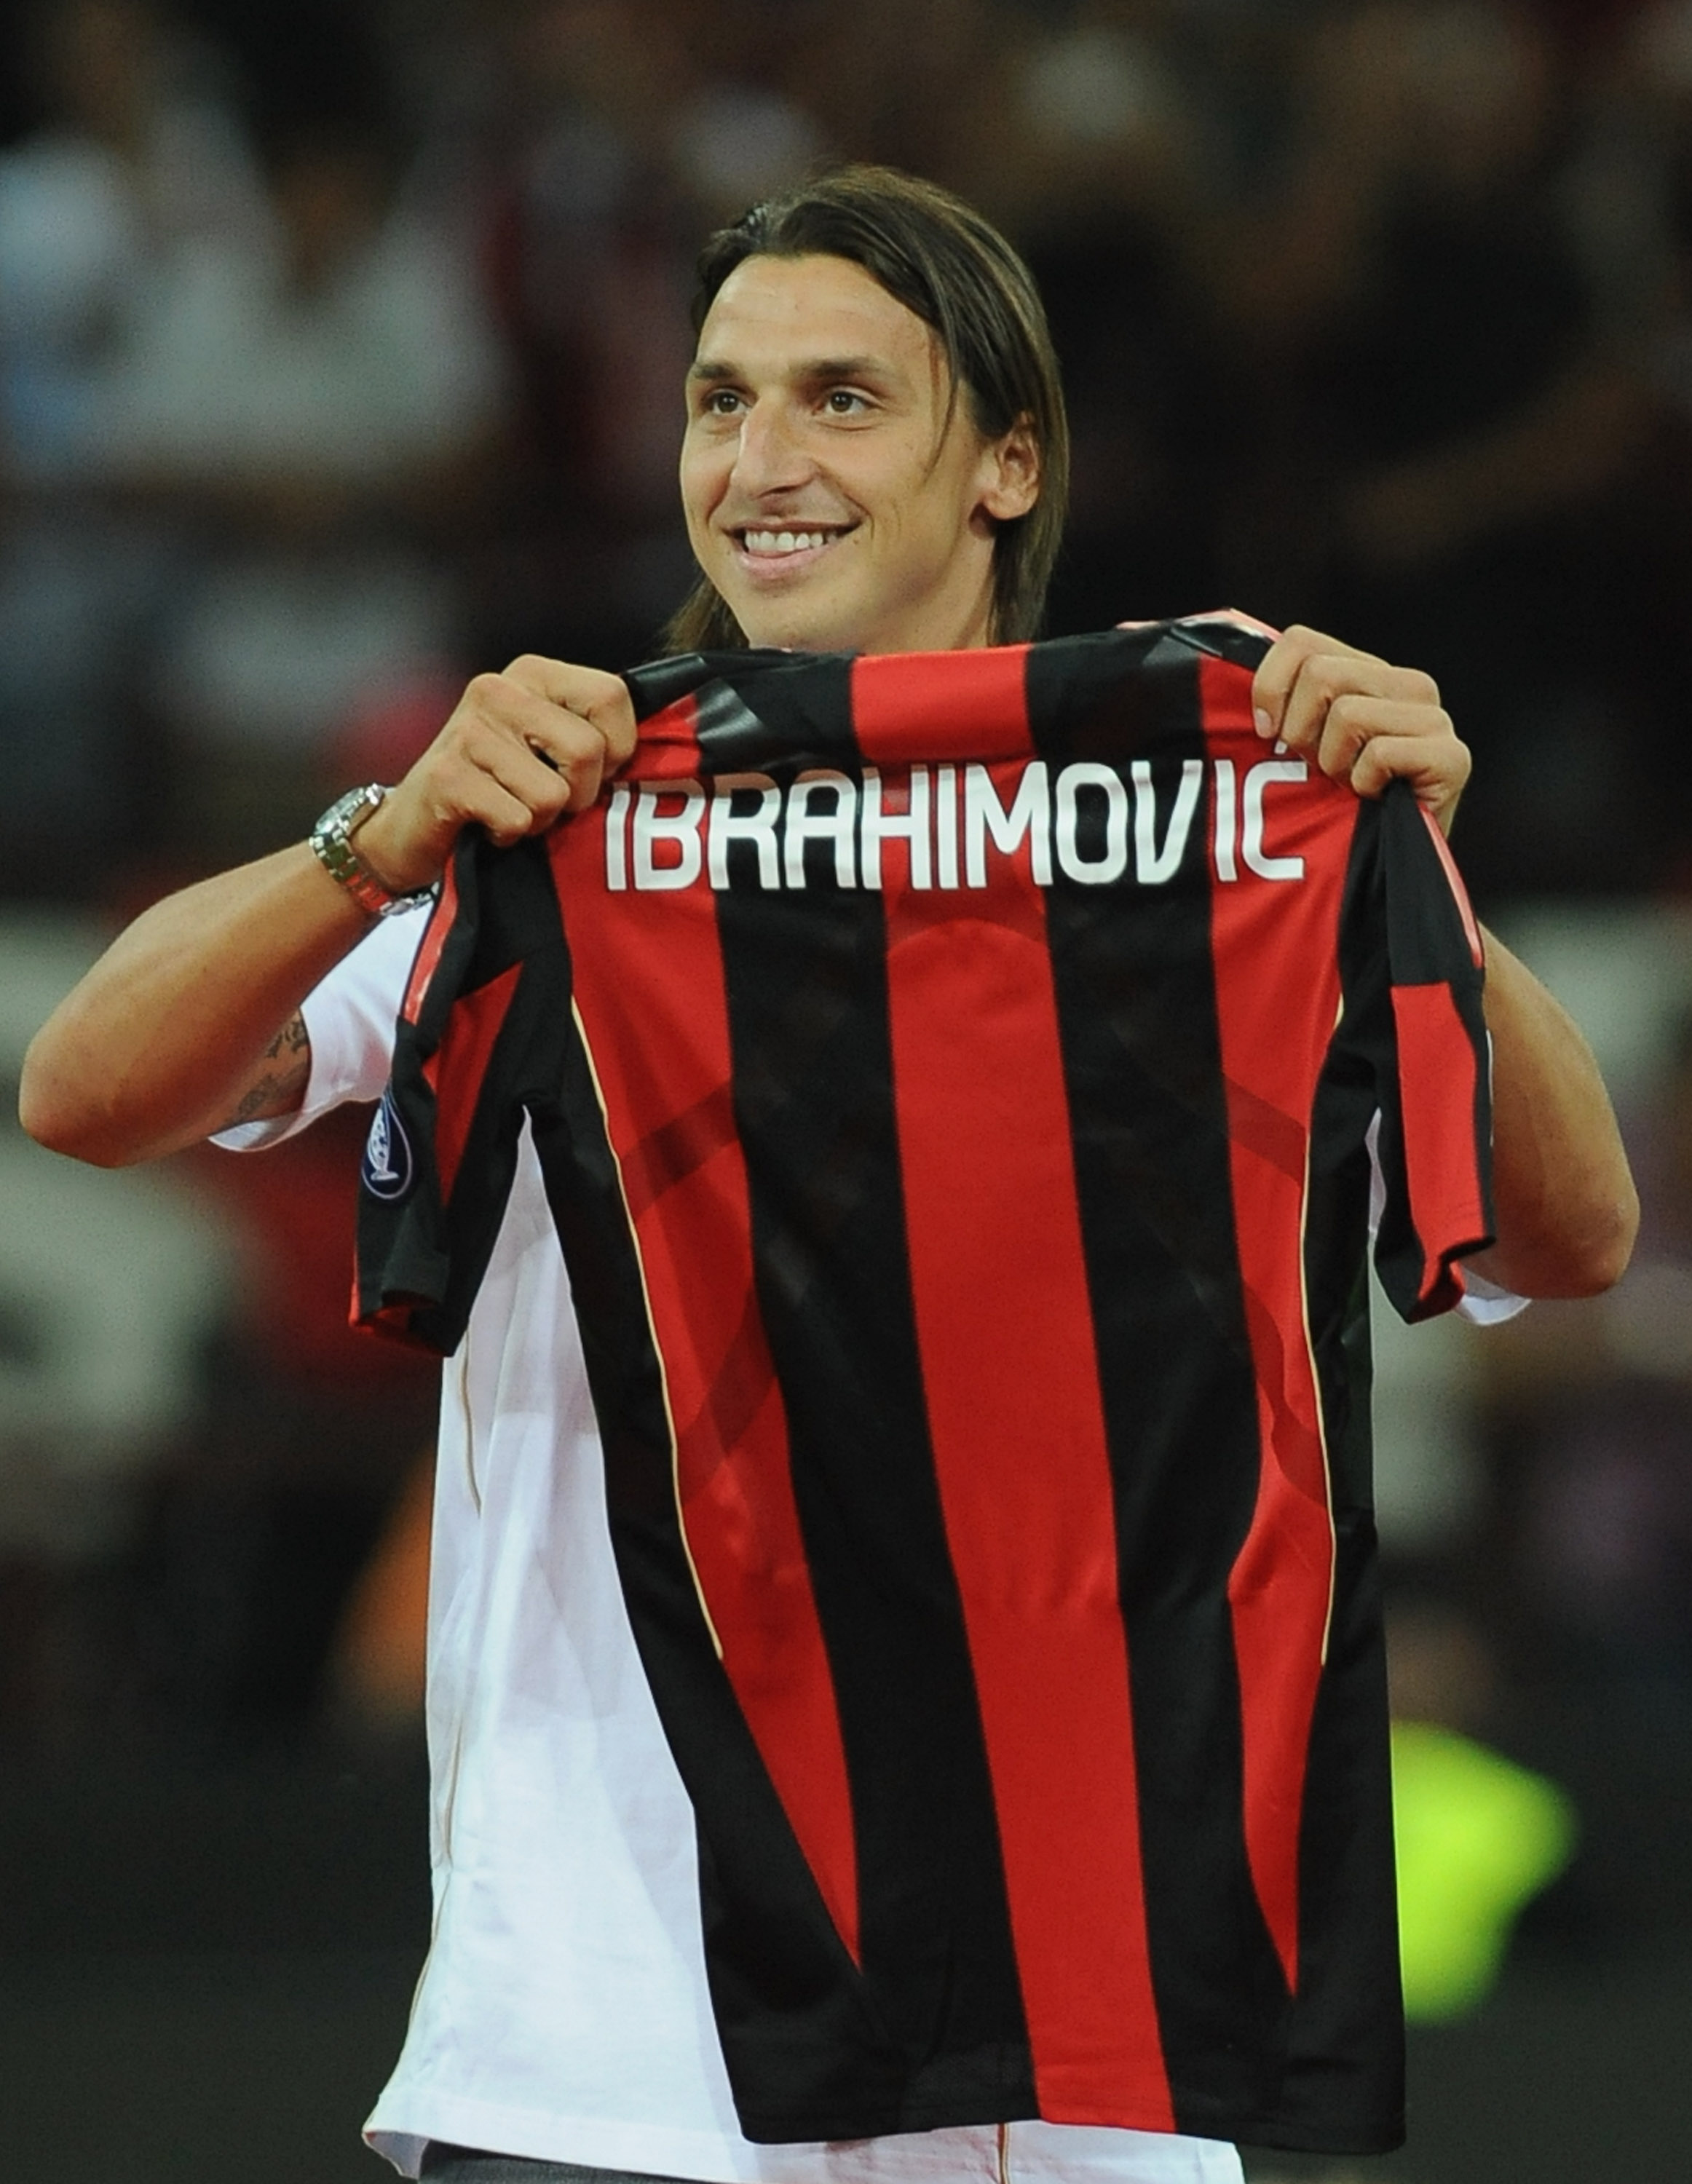 Zlatan Ibrahimovic was unveiled to the fans at halftime of Milan's 4-0 victory over Lecce.